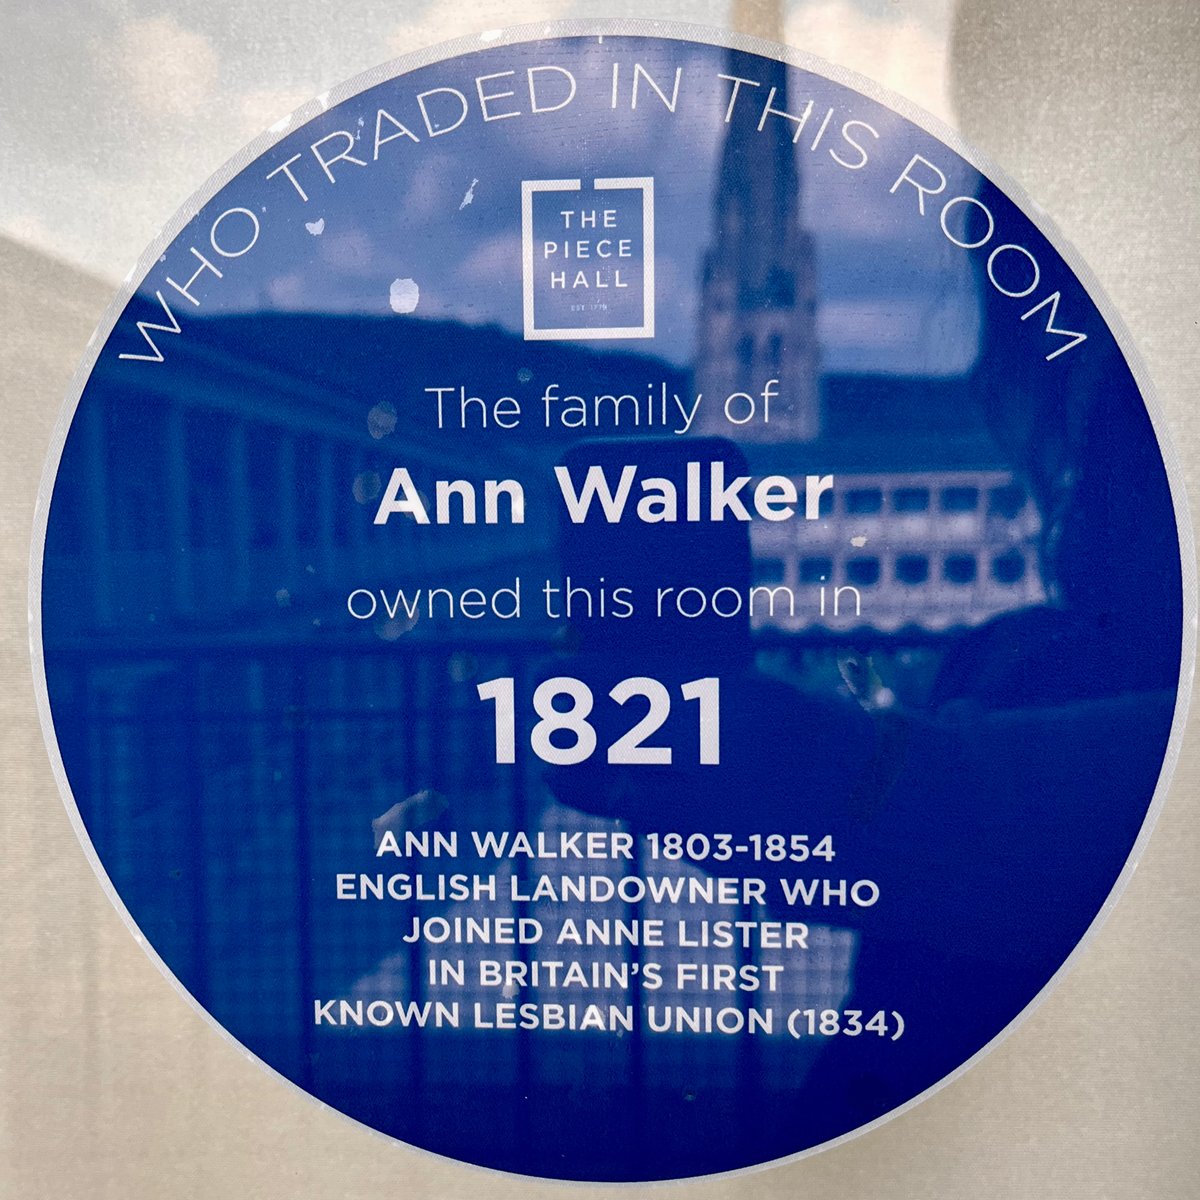 A piece of herstory at the Piece Hall

#Halifax #PieceHall #Herstory #History #WomenInHistory #AnnWalker #AnneLister #LGBTHistory #QueerHistory #LesbianHistory #Yorkshire ￼#GentlemanJack